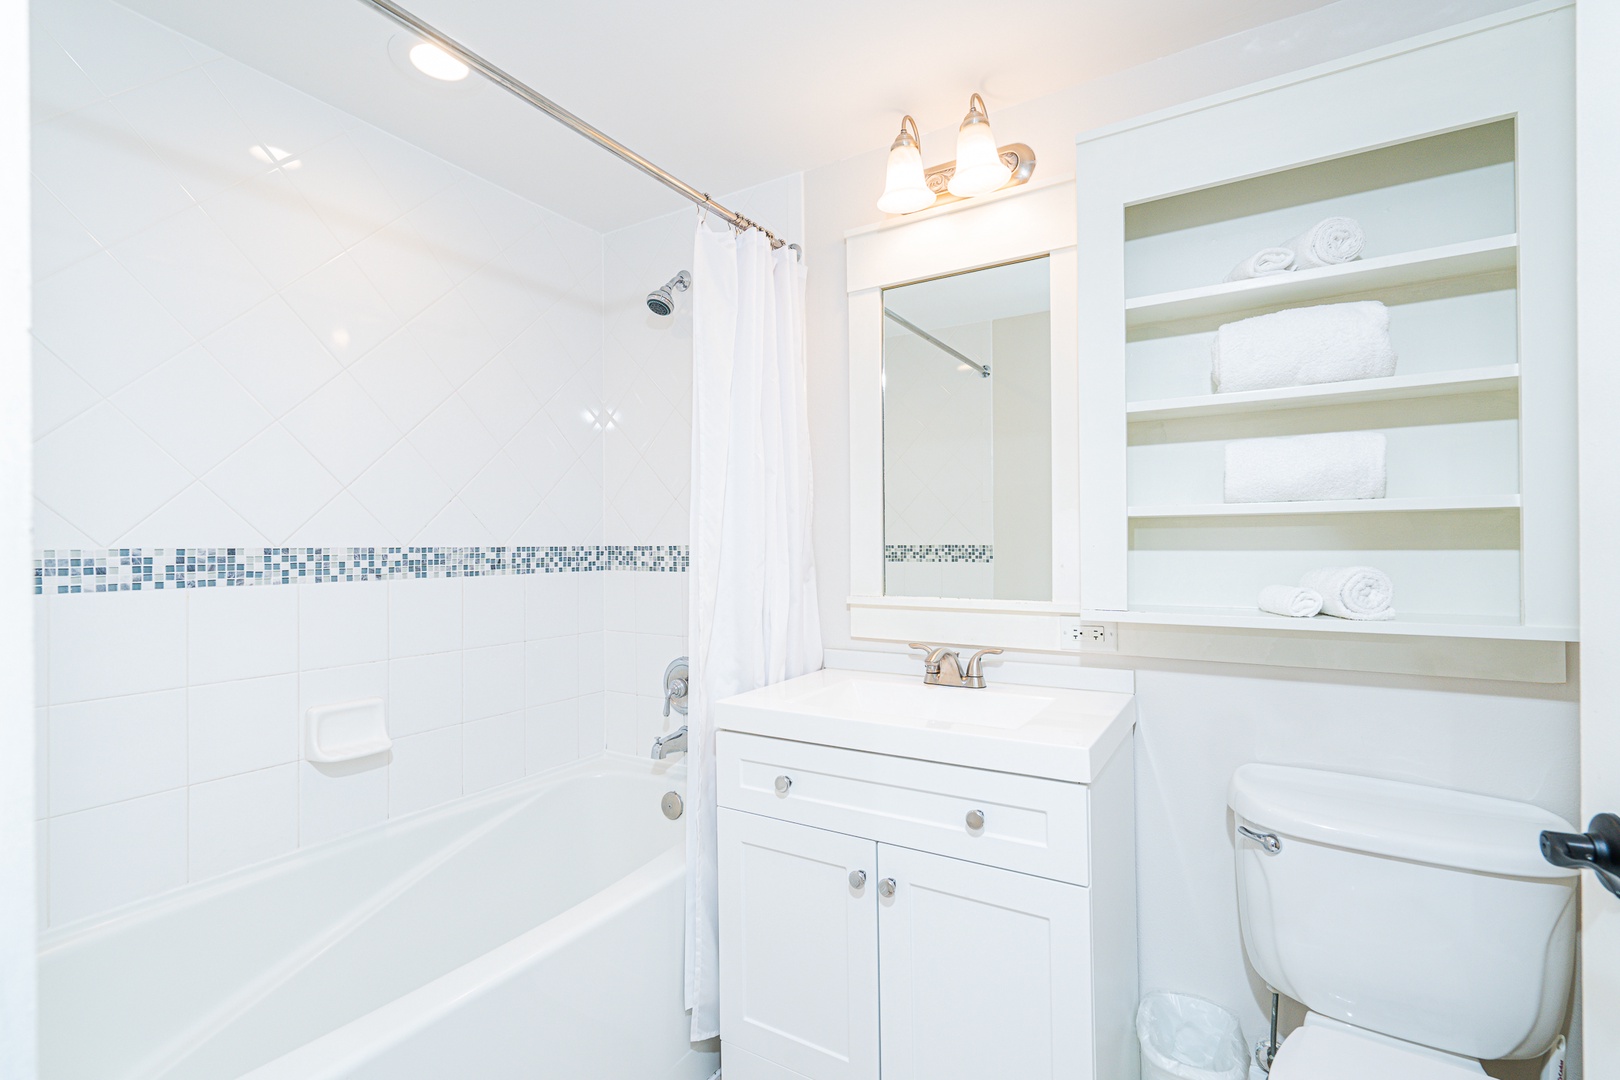 The airy full bathroom features a single vanity & shower/tub combo